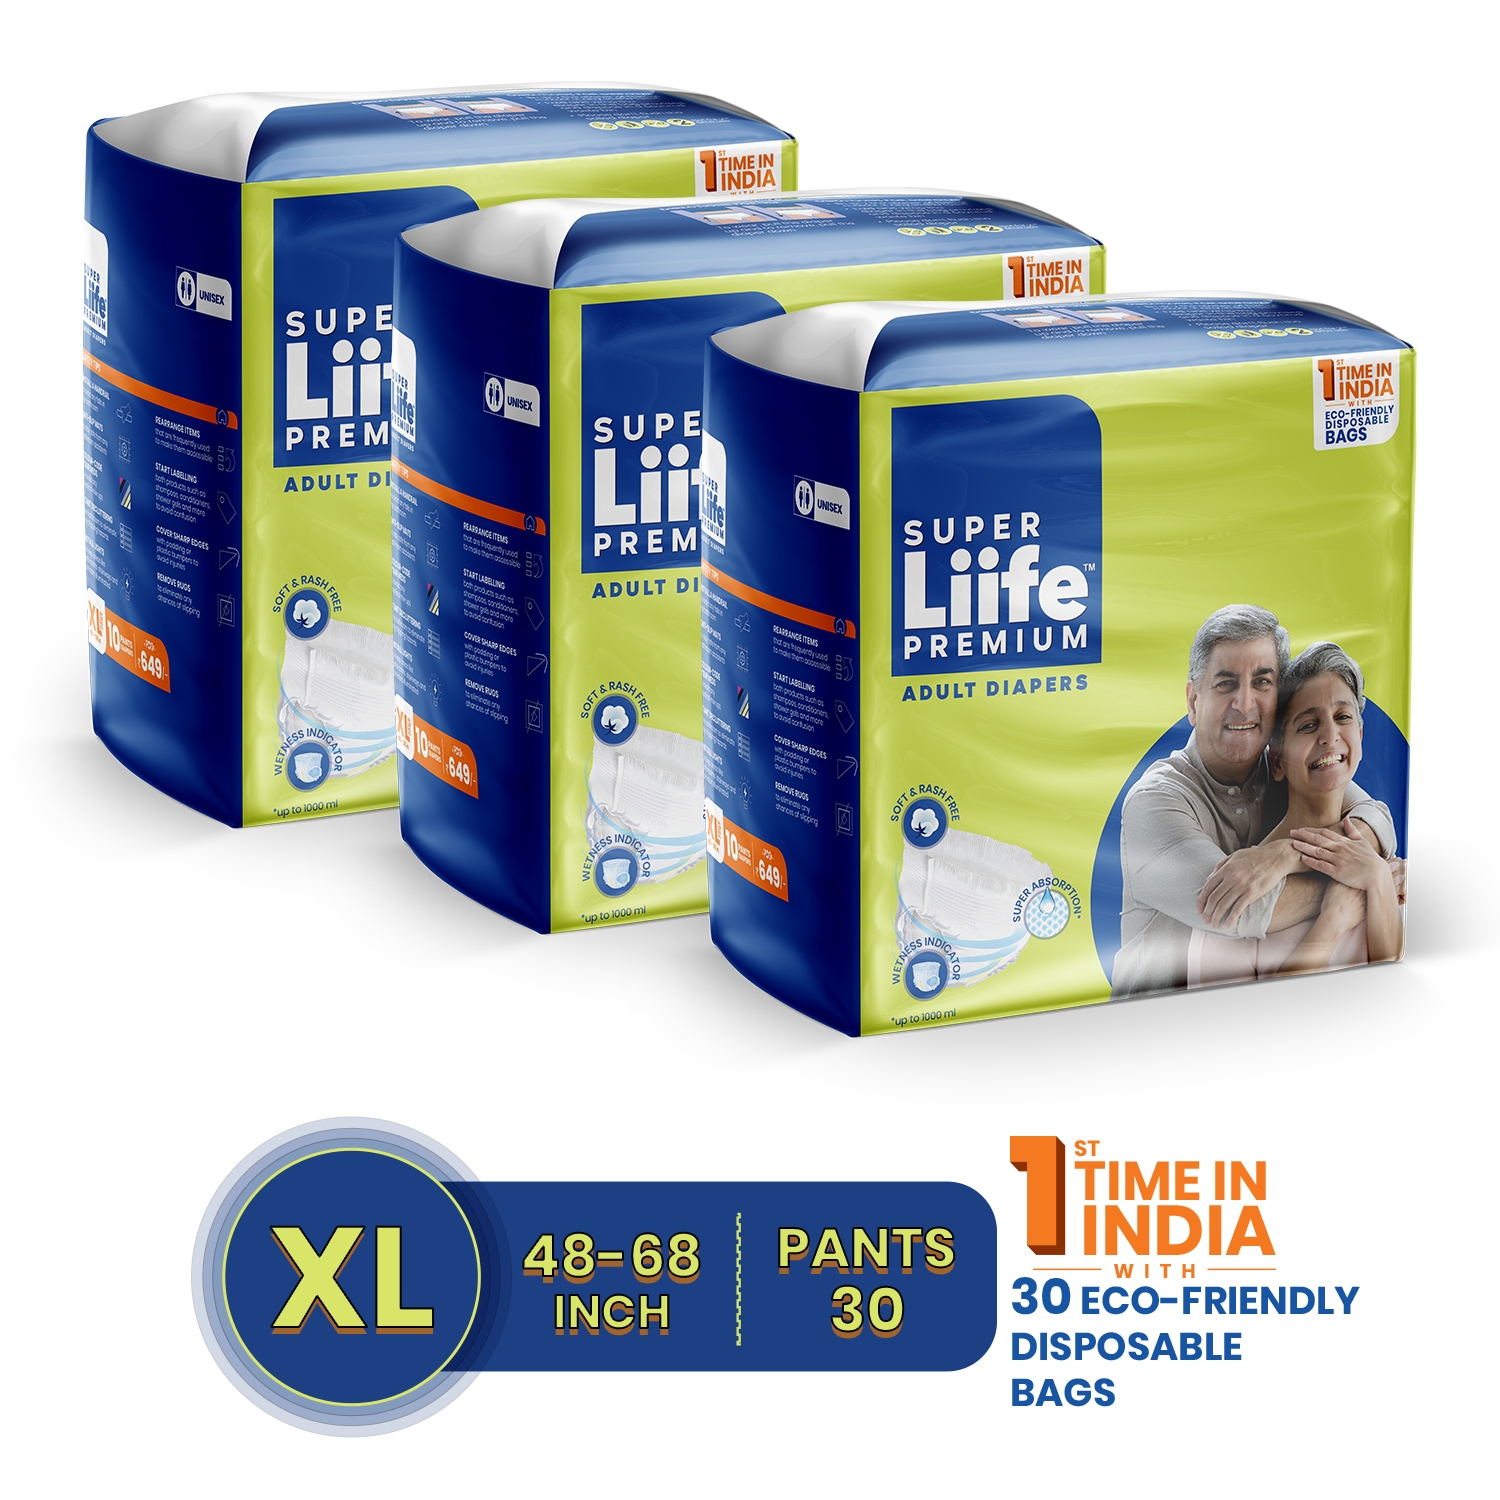 Super Liife | Super Liife Rash Free Adult Diapers Pants with Wetness Indicator and Disposable Bags - 30 Count (Extra Large)